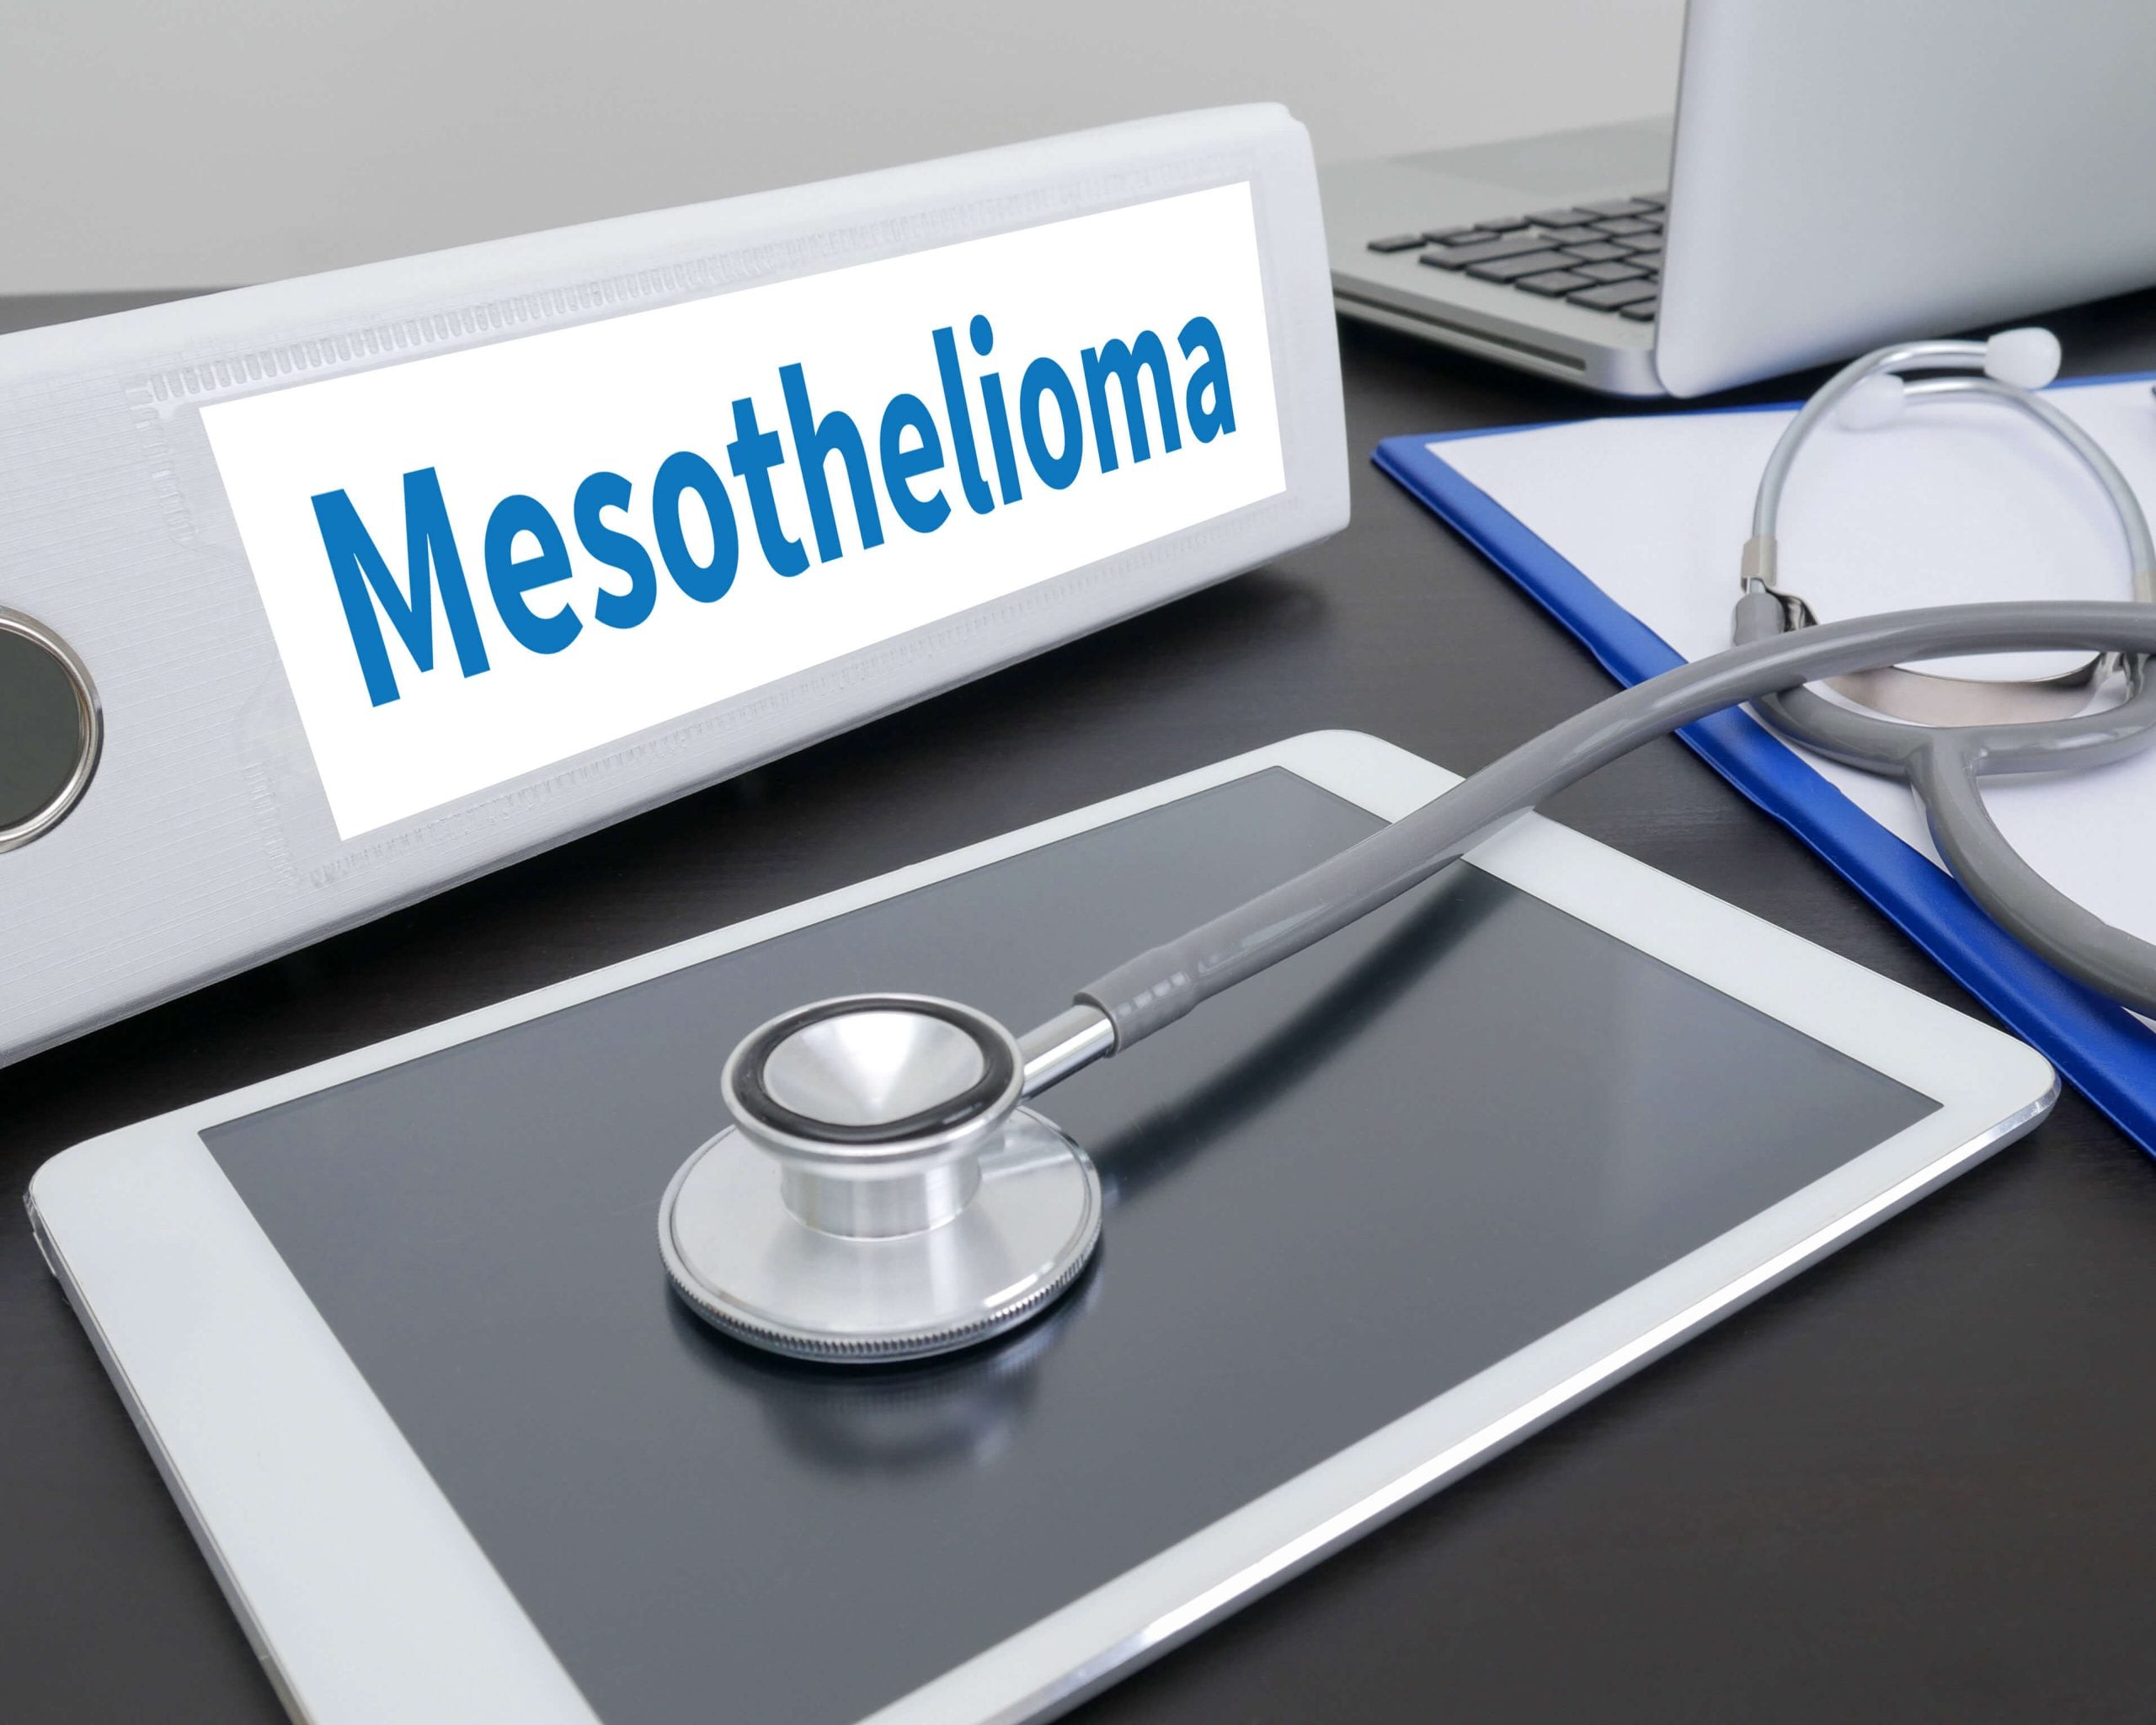 Stages-of-Mesothelioma in Santa Fe